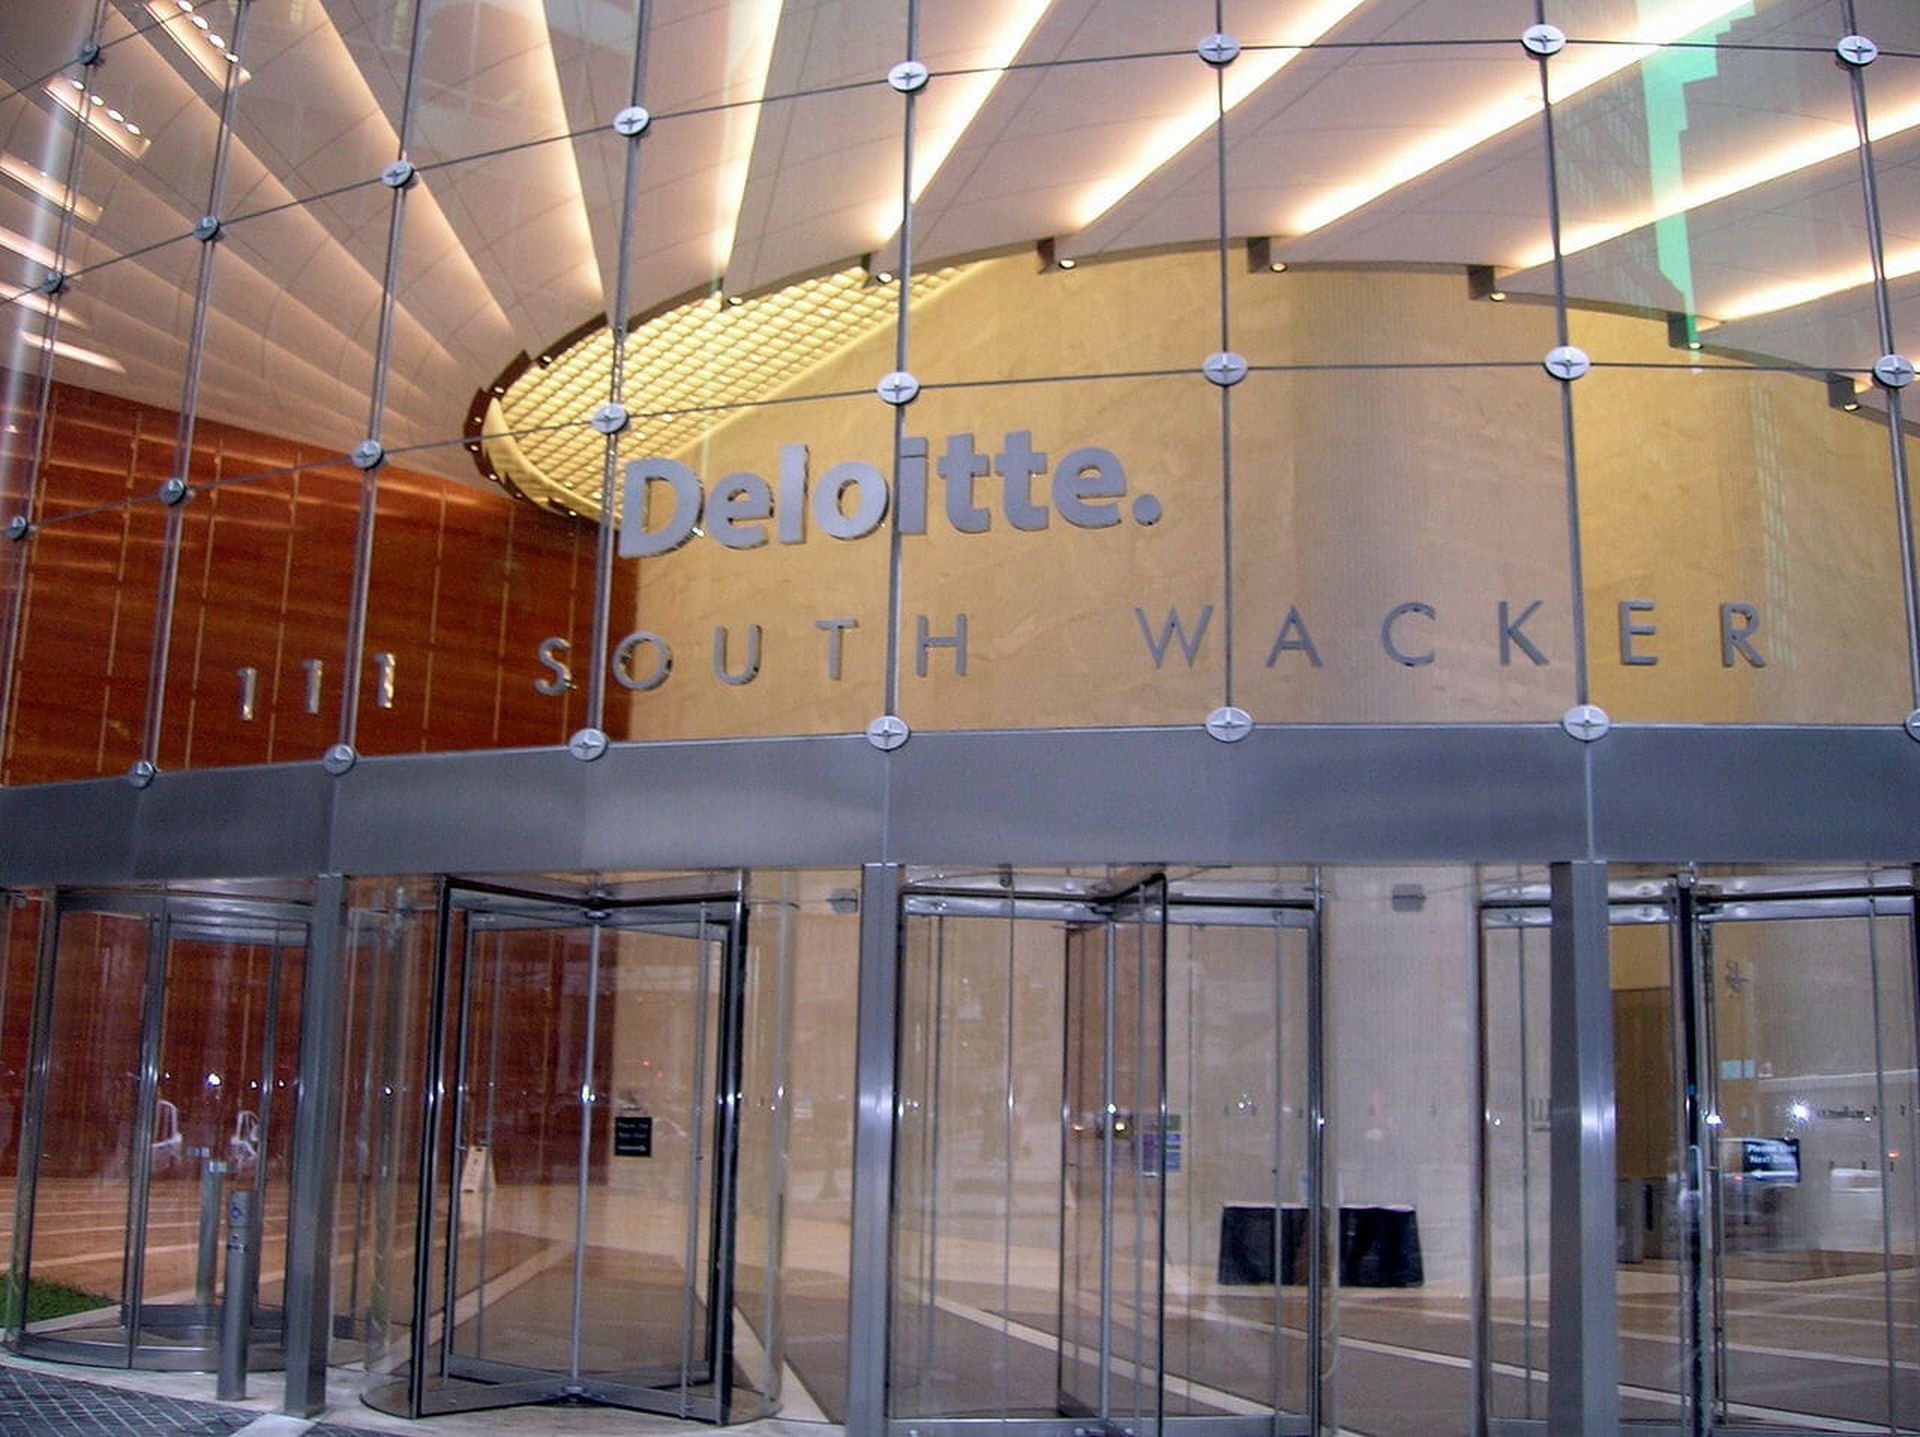 Deloitte’s office in Chicago, Illinois. (Transferred from en.wikipedia to Commons by mblumber.)